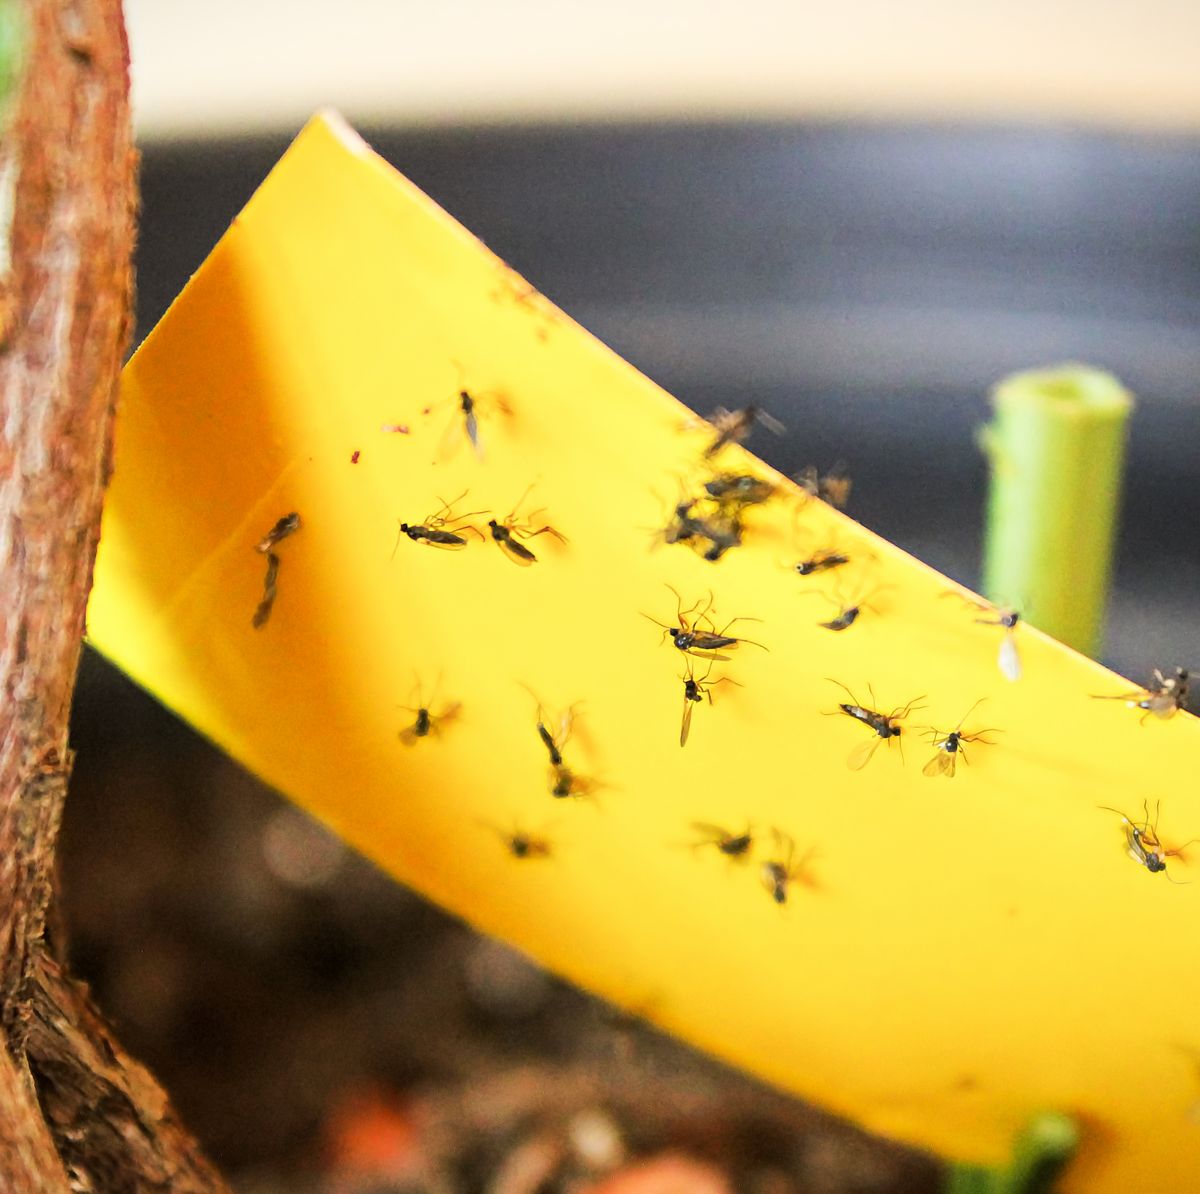 https://hips.hearstapps.com/hmg-prod/images/closeup-of-fungus-gnats-being-stuck-to-yellow-royalty-free-image-1590690431.jpg?crop=0.670xw:1.00xh;0.125xw,0&resize=1200:*